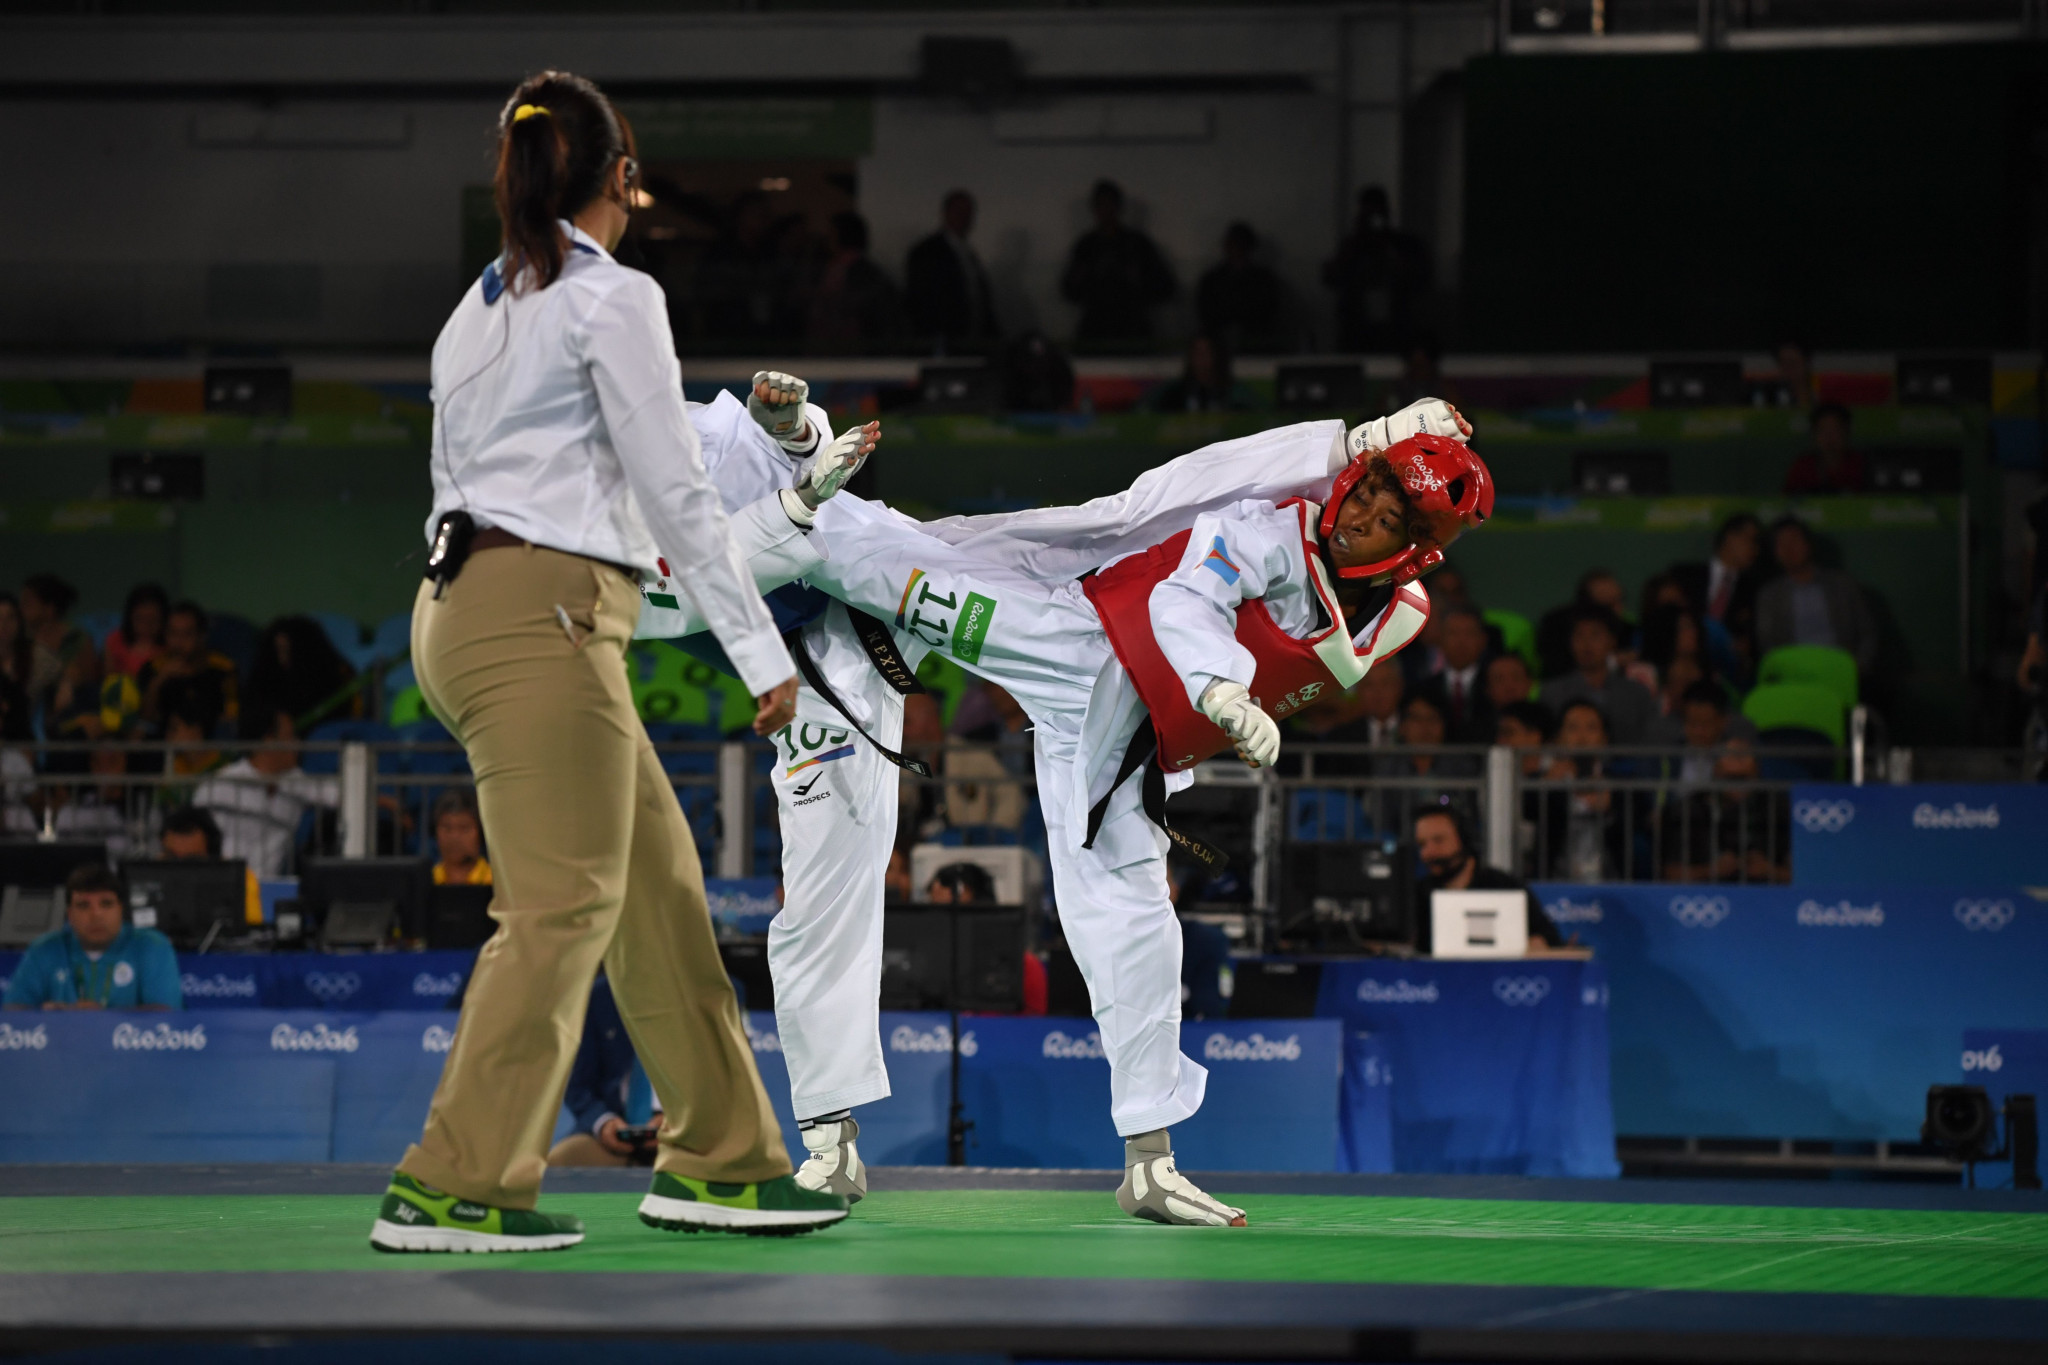 The camps will focus on kyorugi and poomsae referee development ©Getty Images